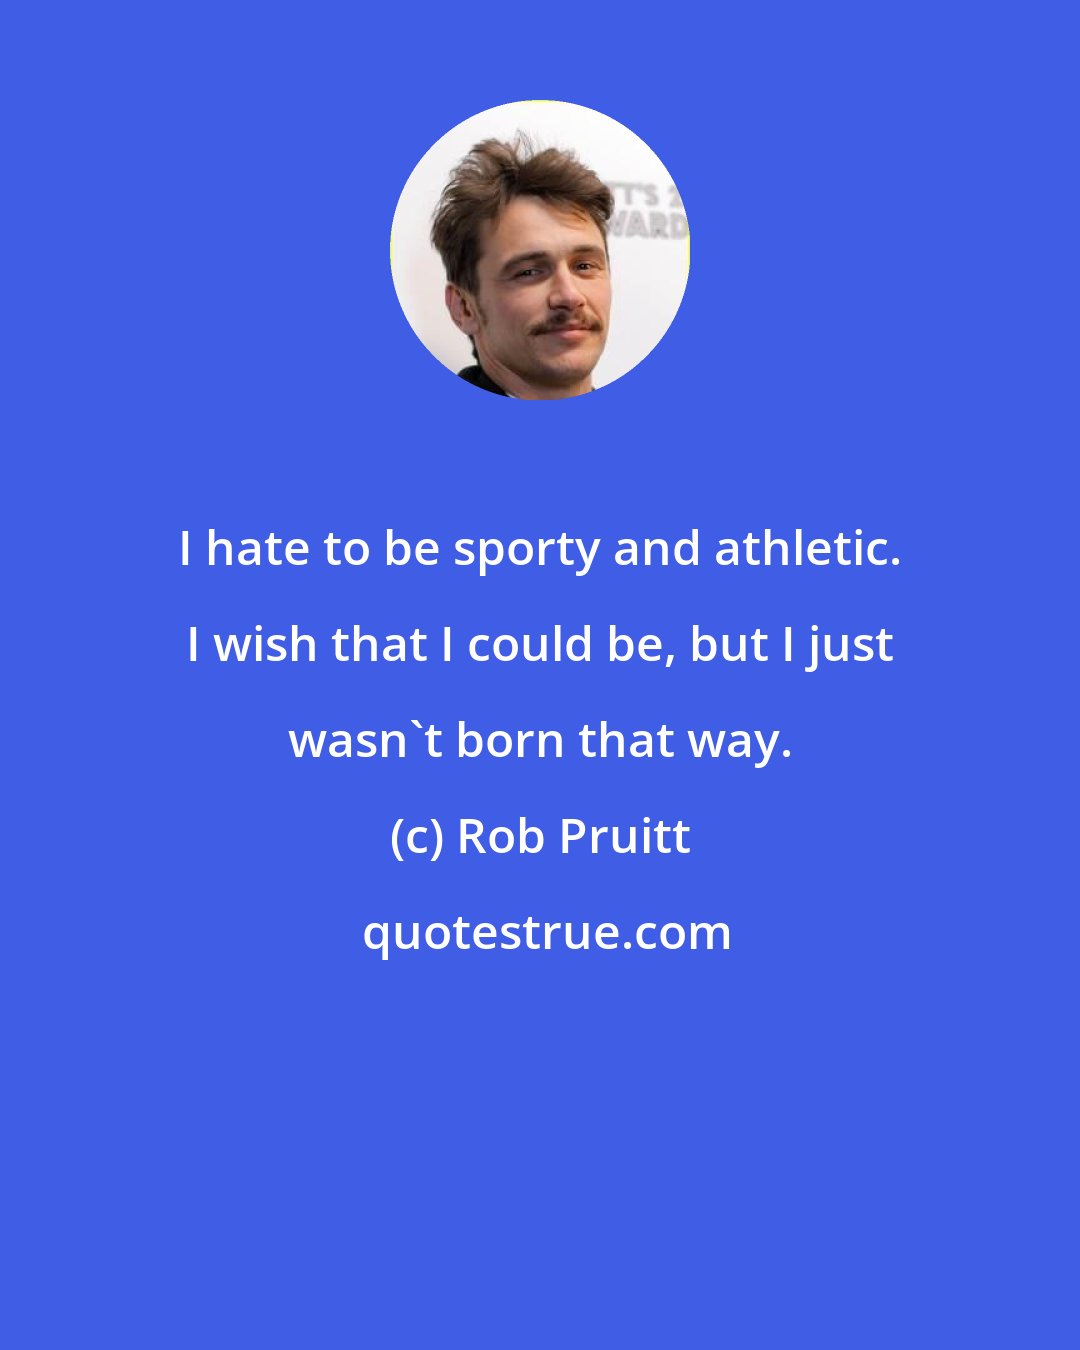 Rob Pruitt: I hate to be sporty and athletic. I wish that I could be, but I just wasn't born that way.